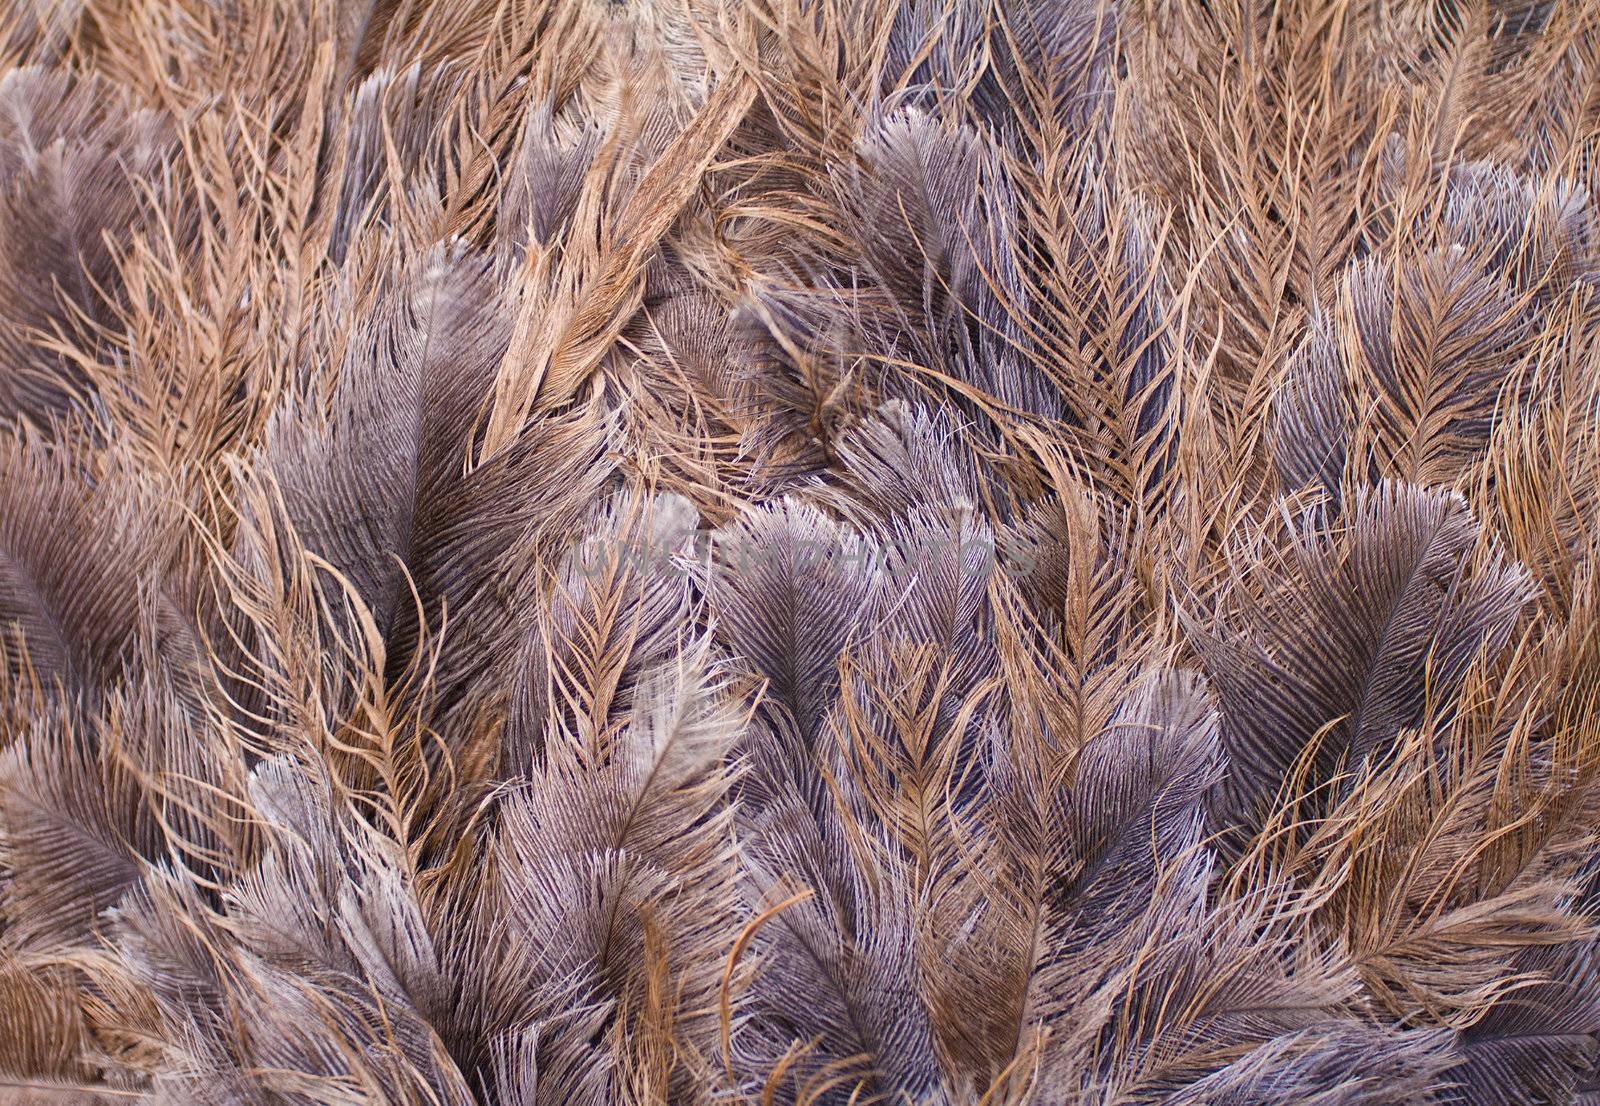  ostrich feathers background, selected focus